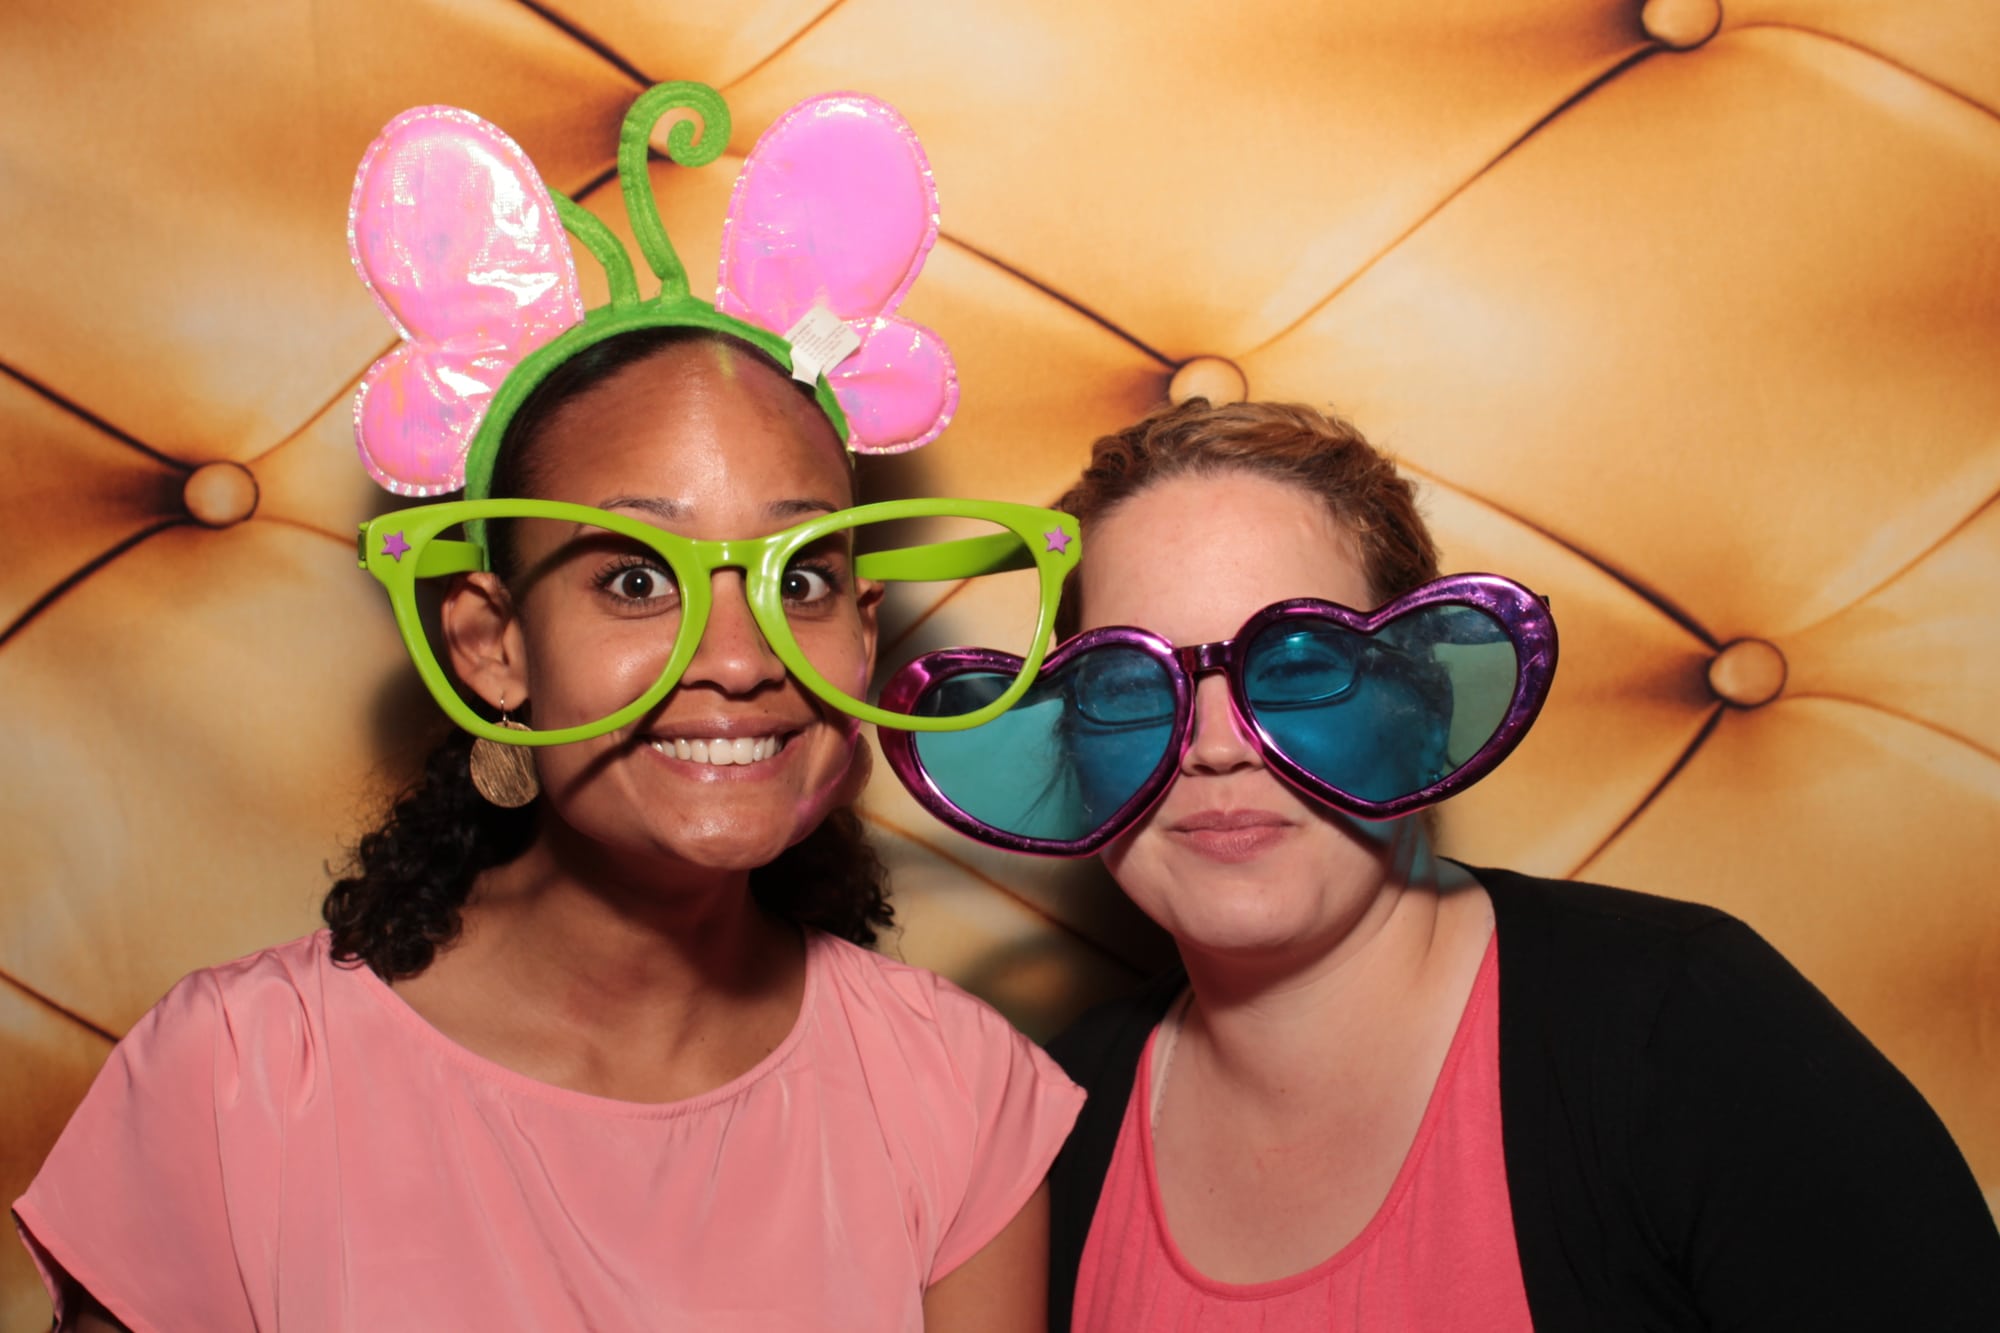 Austin-Photo Booth Rental-No. 1-Colorful-Fun-Props-Sixth Street-Gold-Backdrop